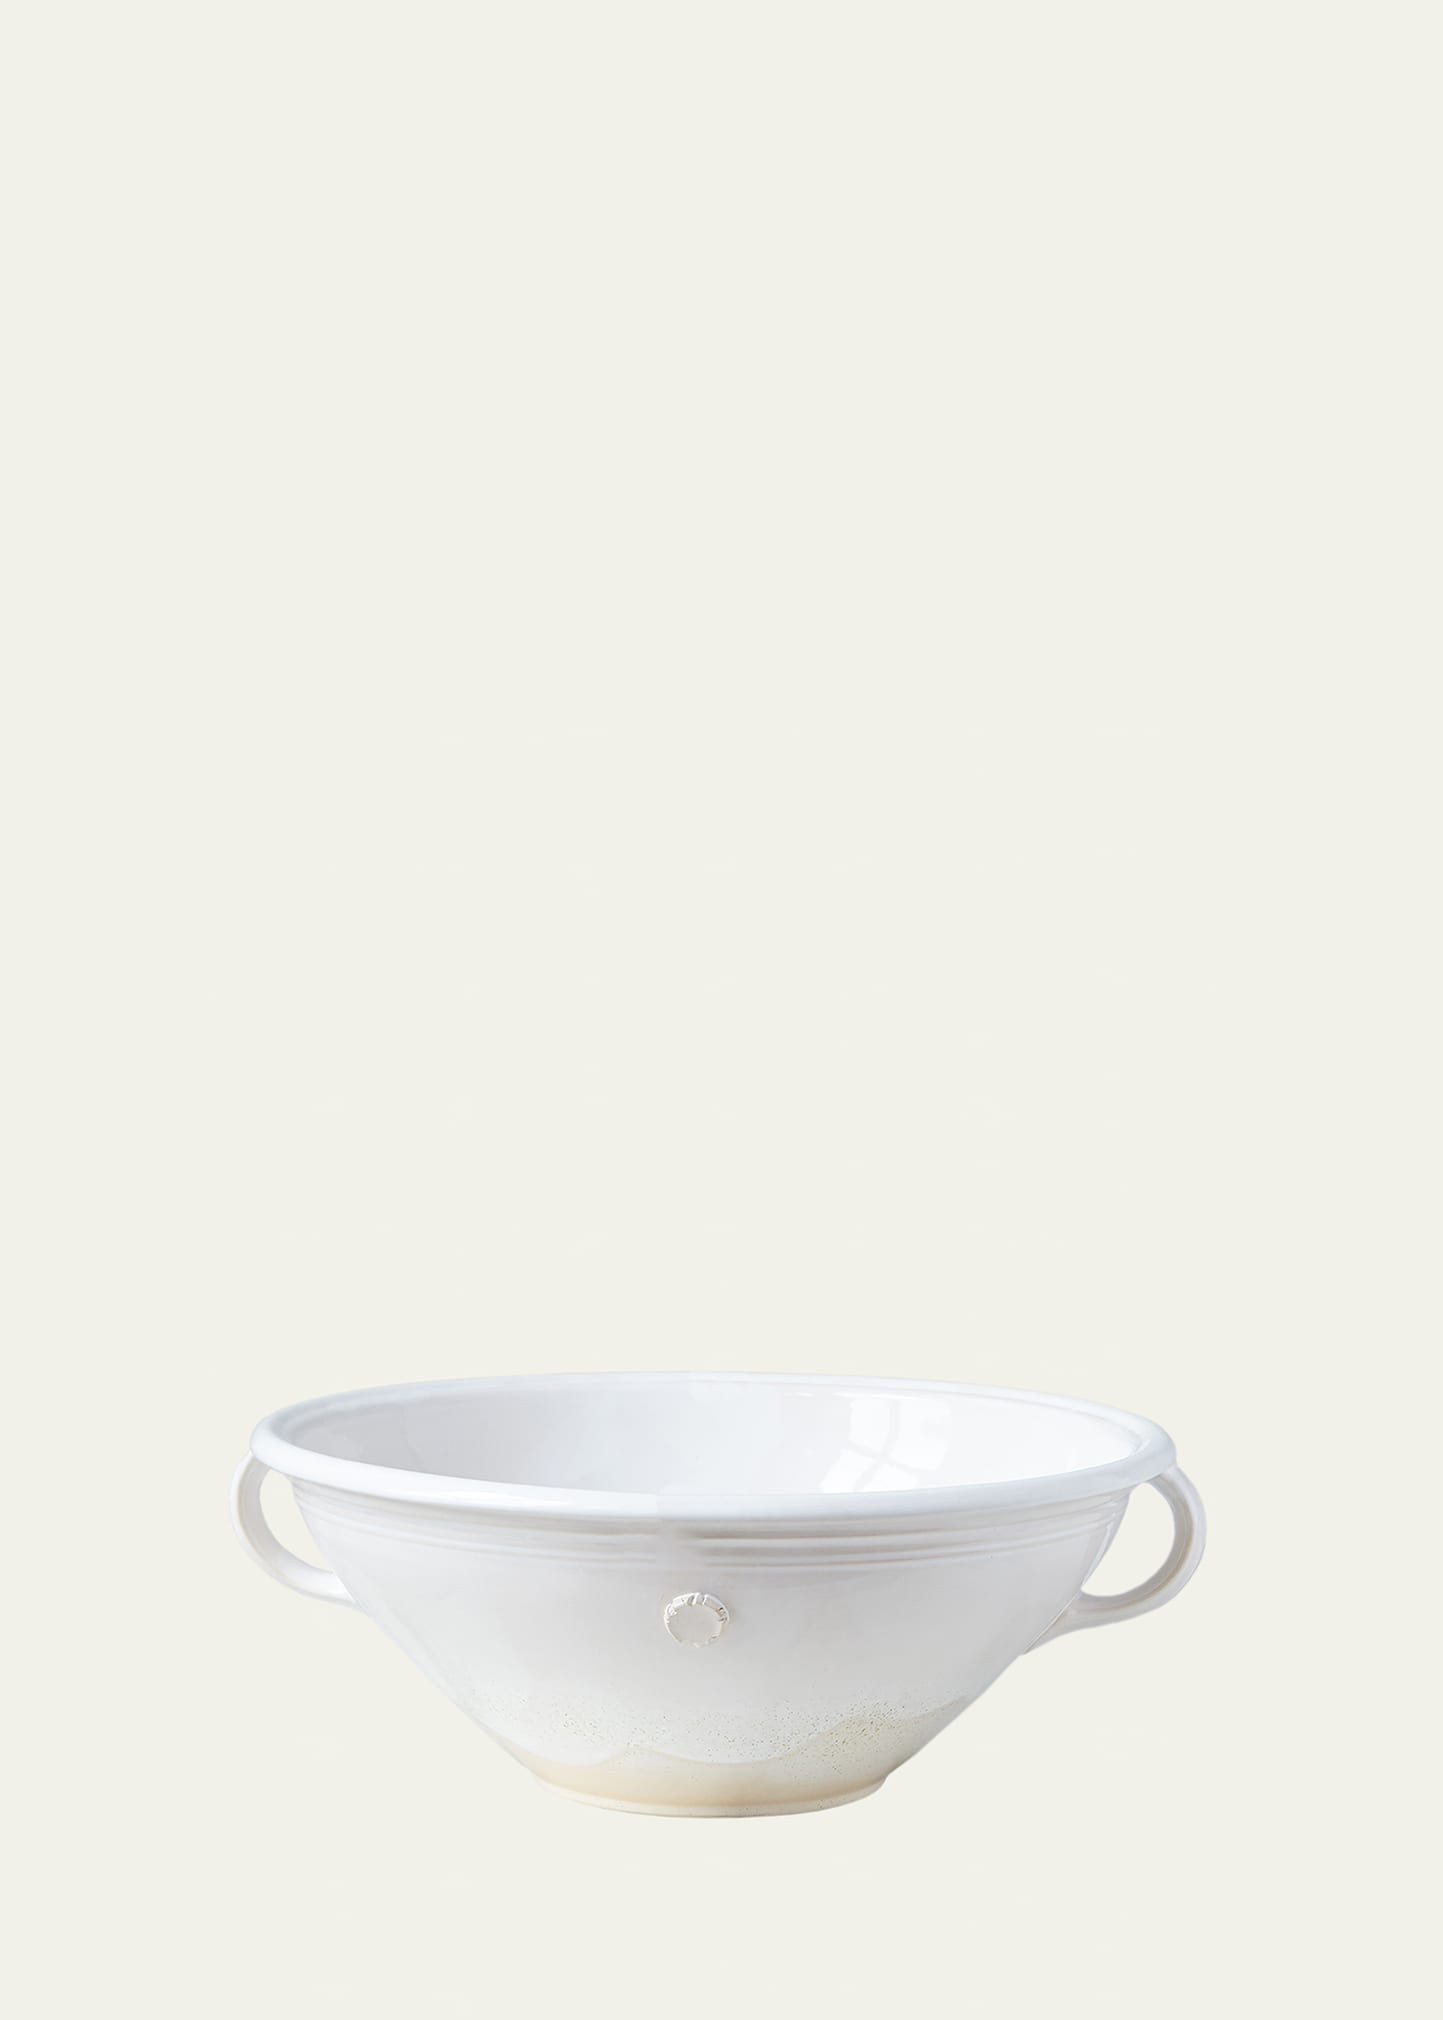 Etúhome Hand-thrown Serving Bowl, 15" In White